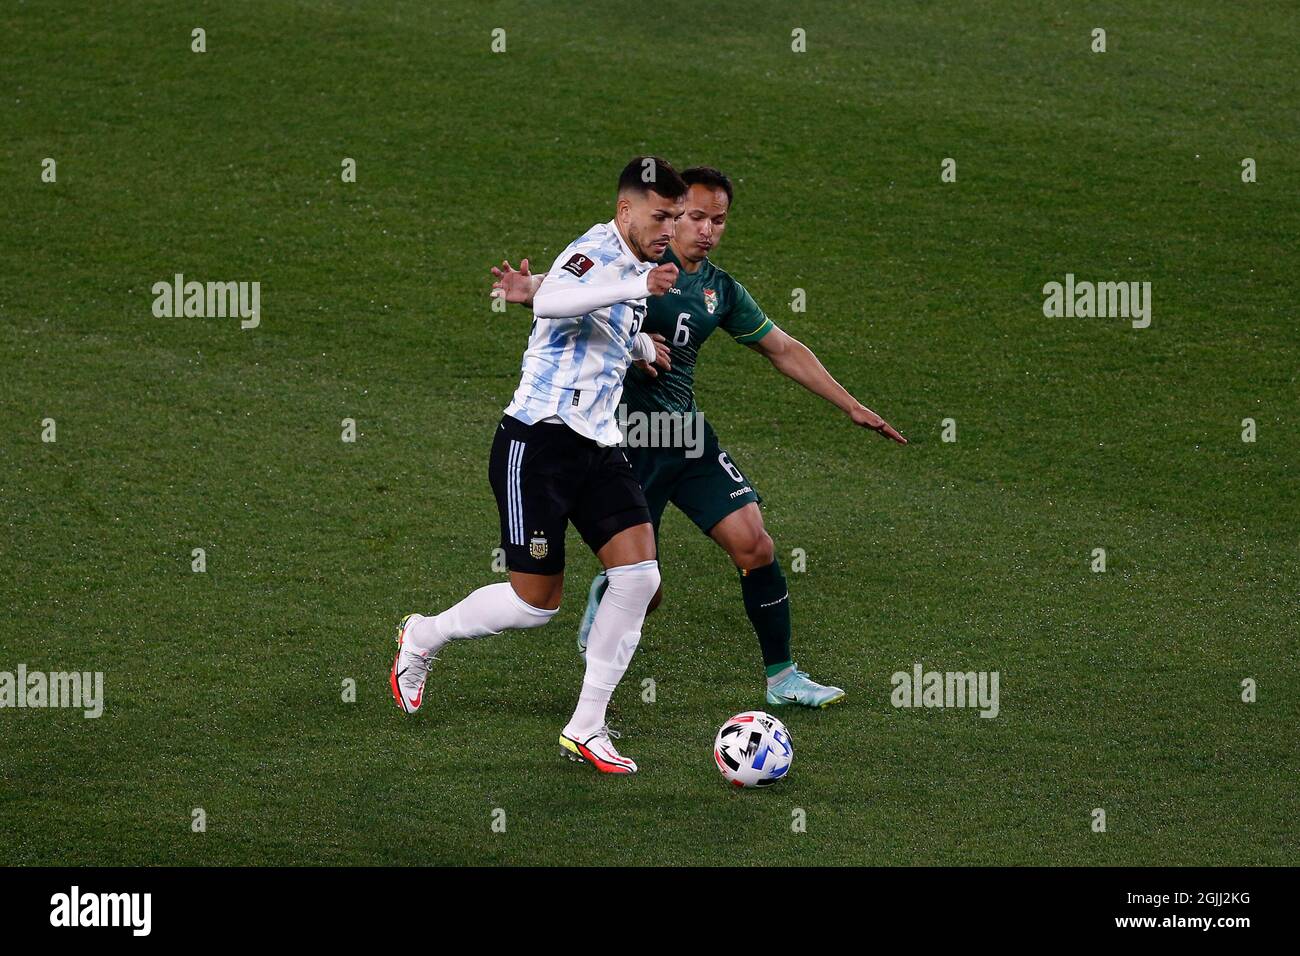 Buenos Aires, Argentina. 09th Sep, 2021. BUENOS AIRES - SEPTEMBER 9: Midfielder Leandro Paredes (5) of Argentina and defender Leon el Justiniano (6) of Bolivia fighting for the ball with during a match between Argentina and Bolivia as part of South American Qualifiers for Qatar 2022 at Estadio Monumental Antonio Vespucio Liberti on September 9, 2021 in Buenos Aires, Argentina. (Photo by Florencia Tan Jun/PxImages) Credit: Px Images/Alamy Live News Stock Photo